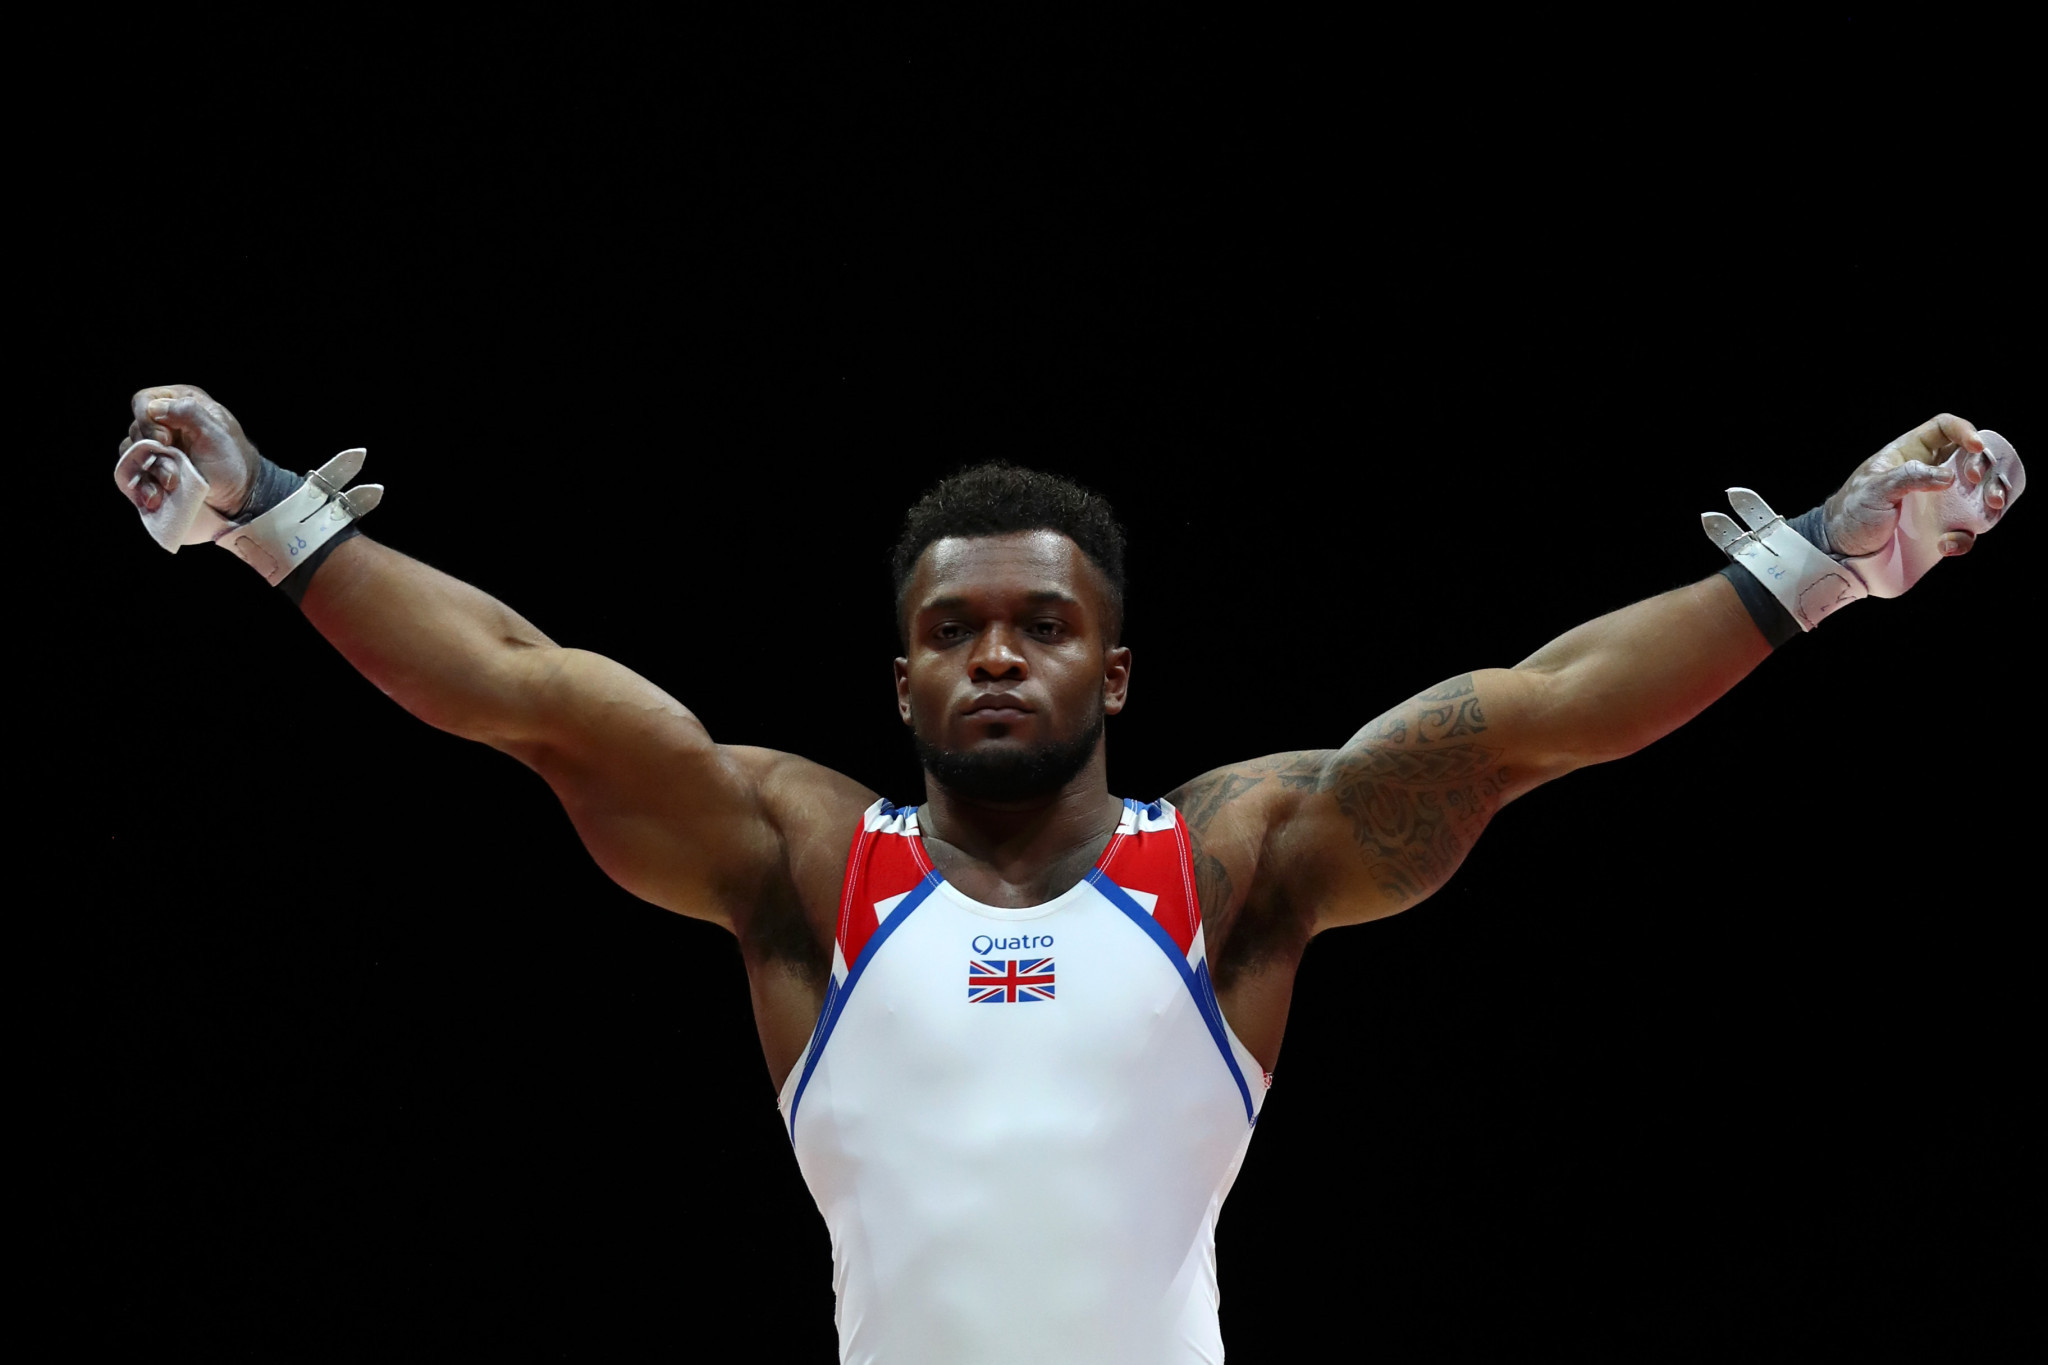 Courtney Tulloch backed up a strong qualifying performance at the FIG Individual Apparatus World Cup in Baku to win the rings final ©Getty Images